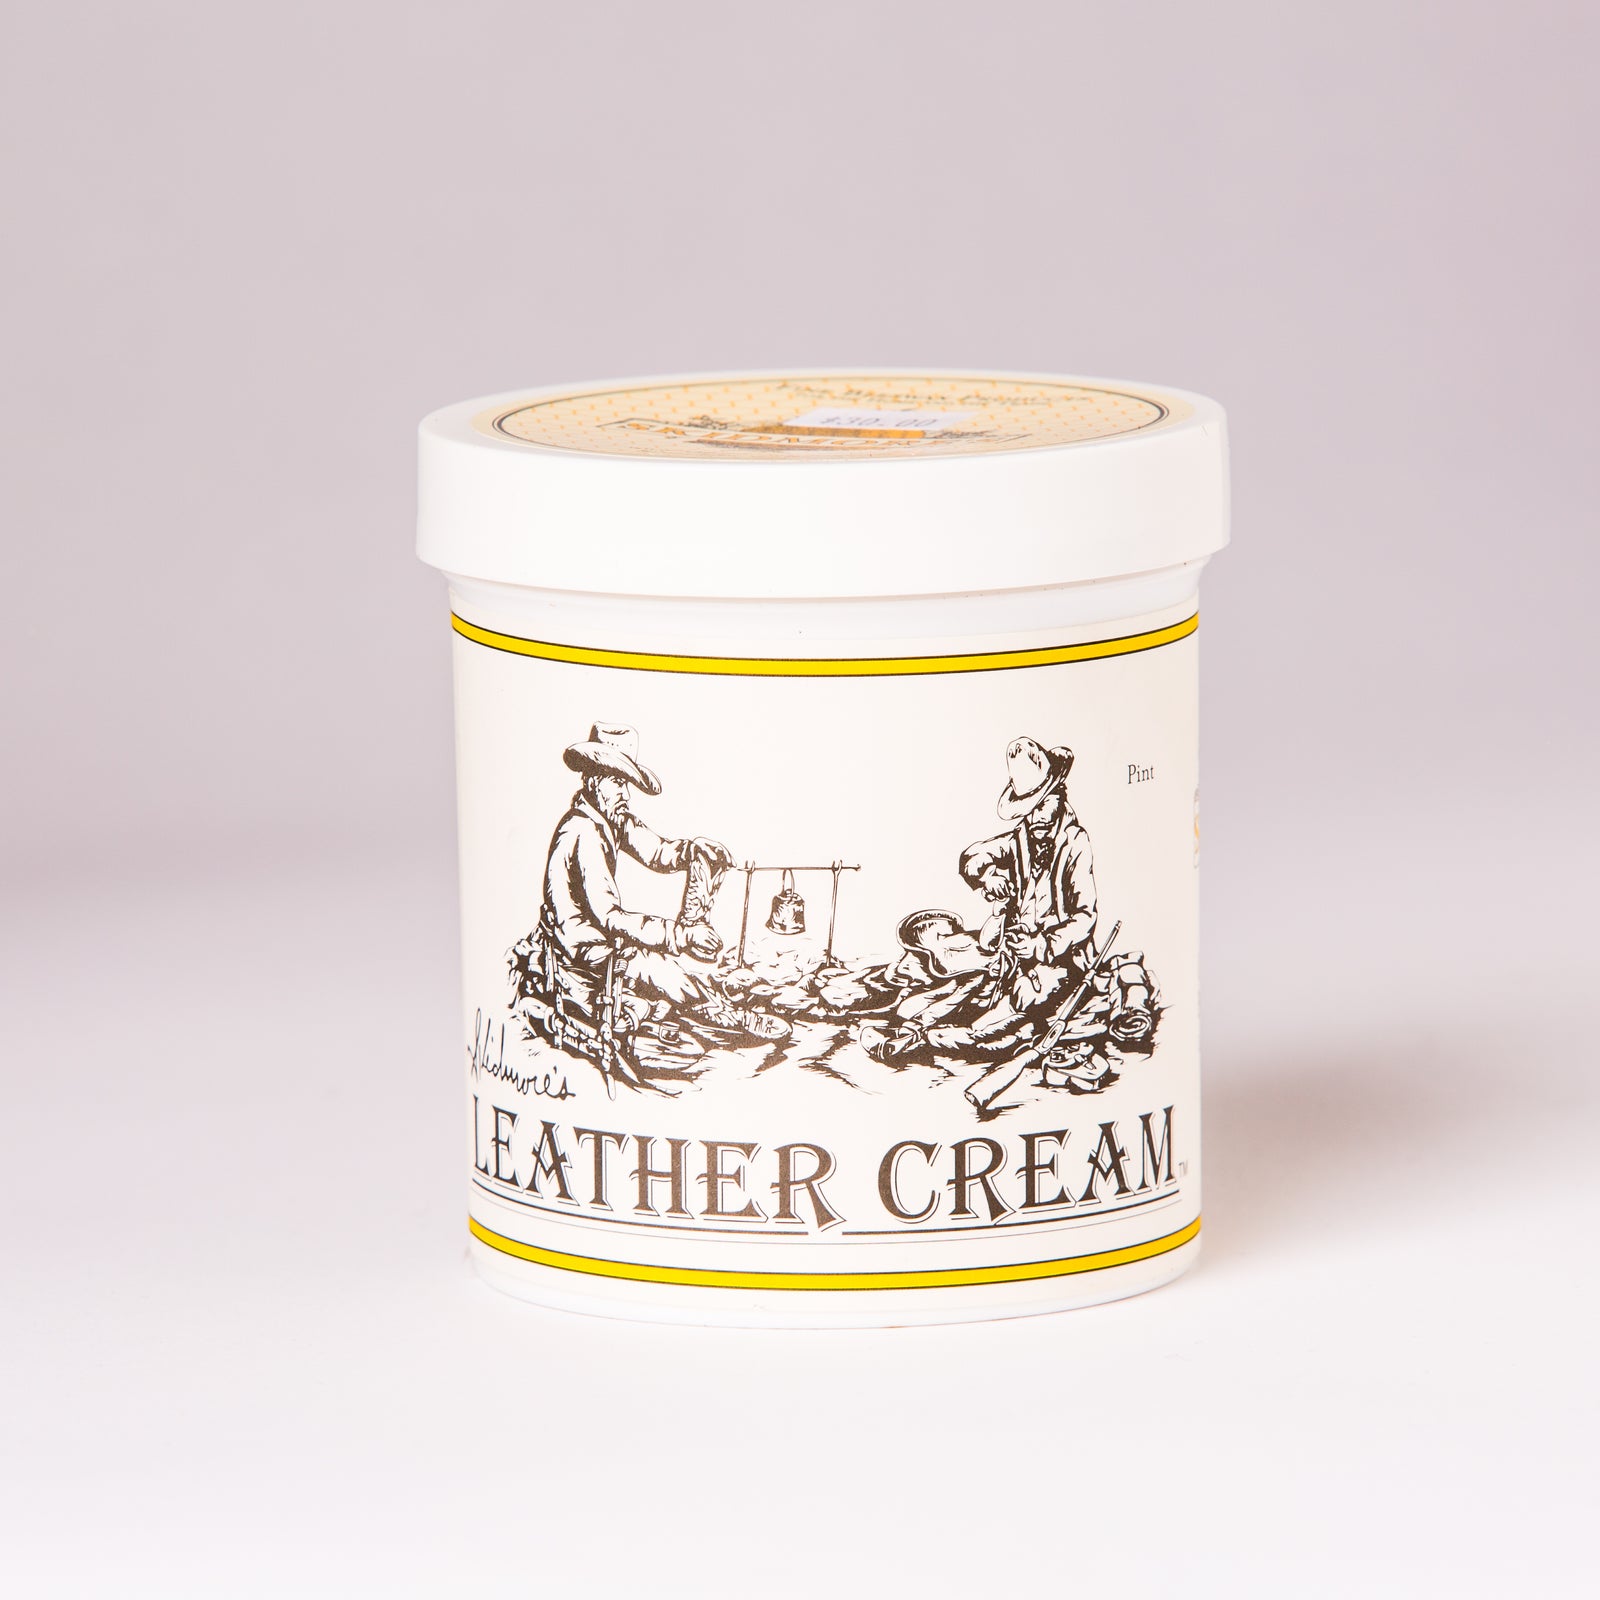 Skidmore's Leather Cream 6OZ - Carter's Boots and Repair